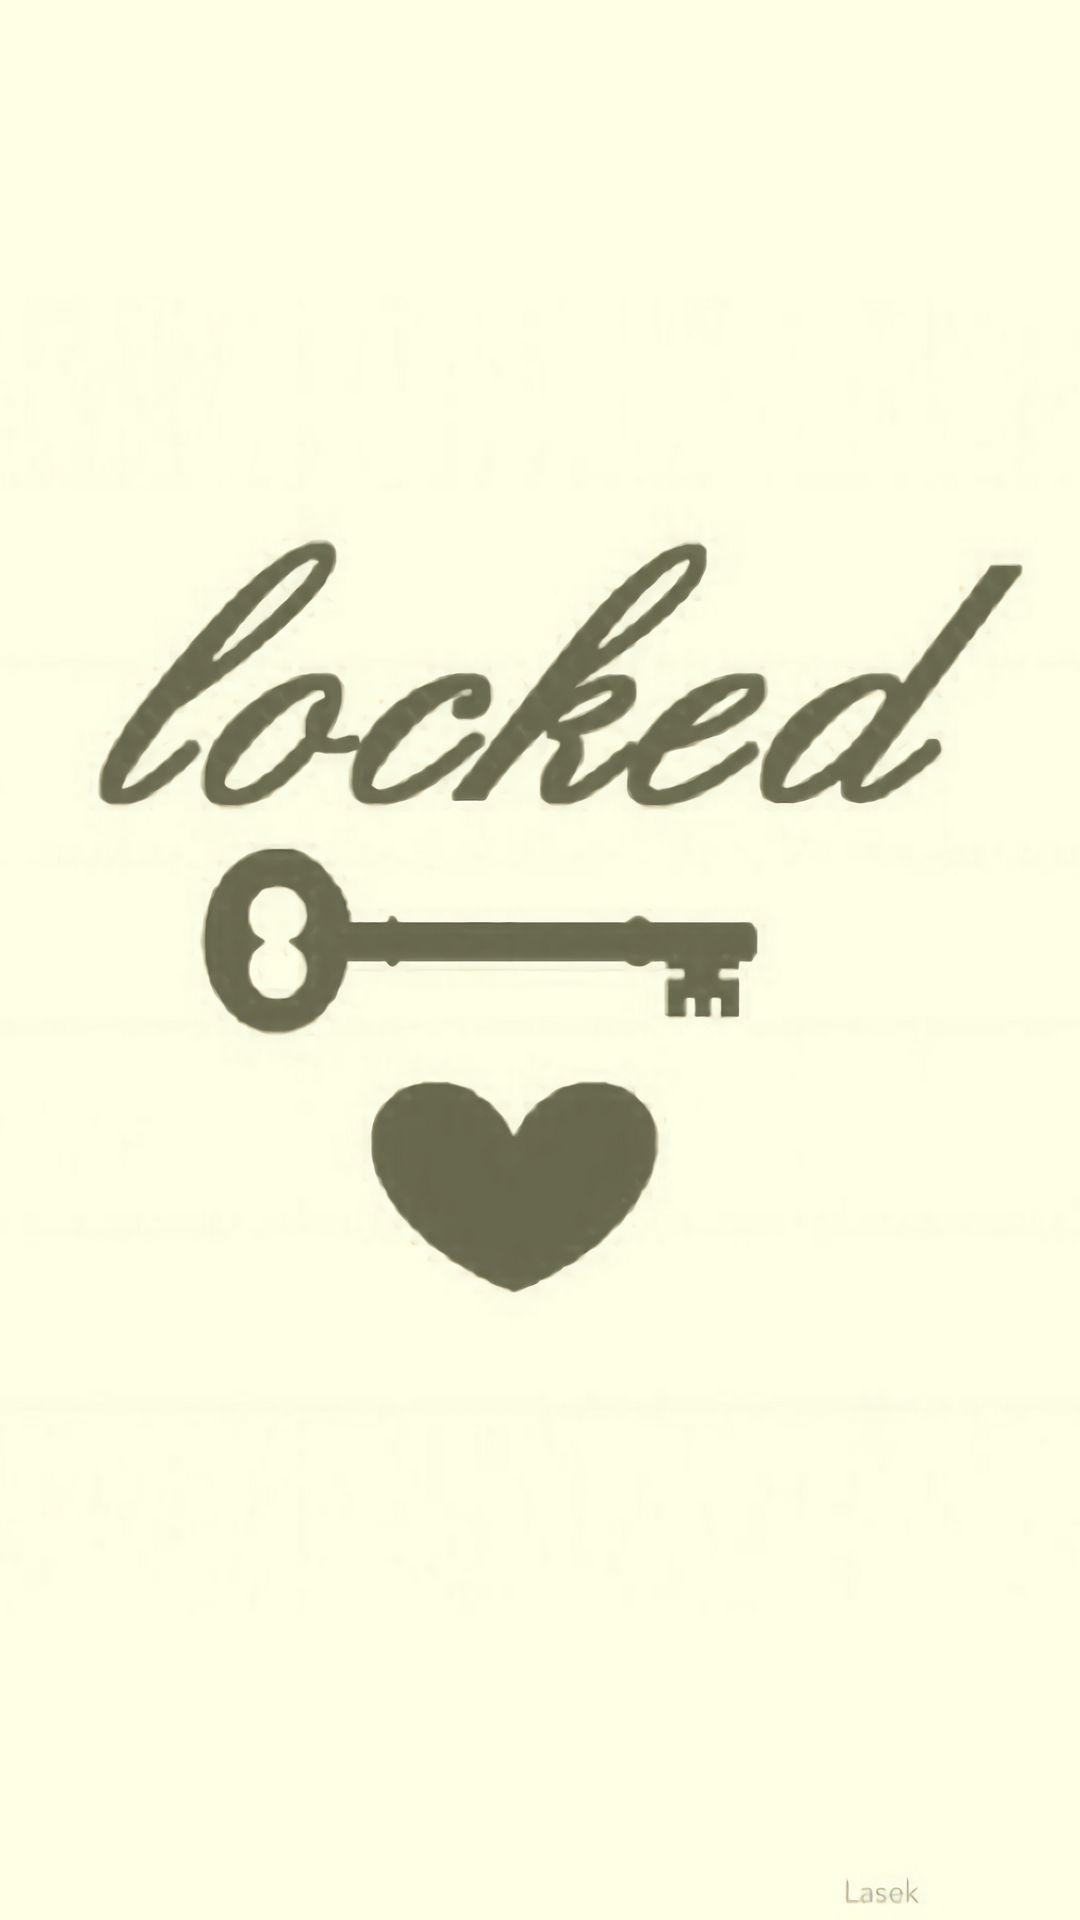 Locked heart shape to see more locked phone wallpaper